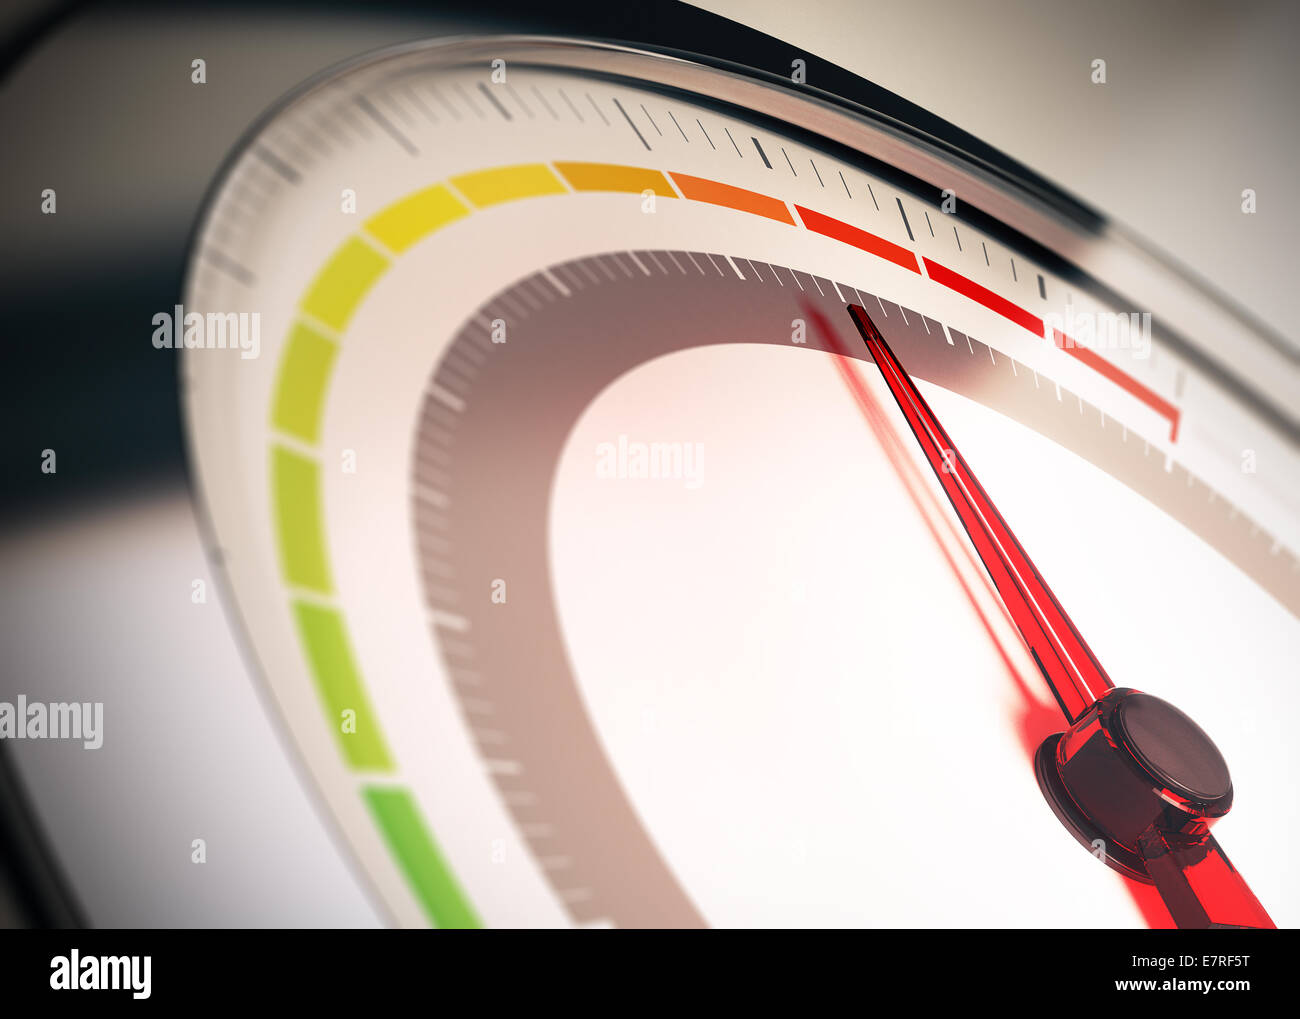 Dial with segments from green to red symbol of risk control or limit Stock Photo